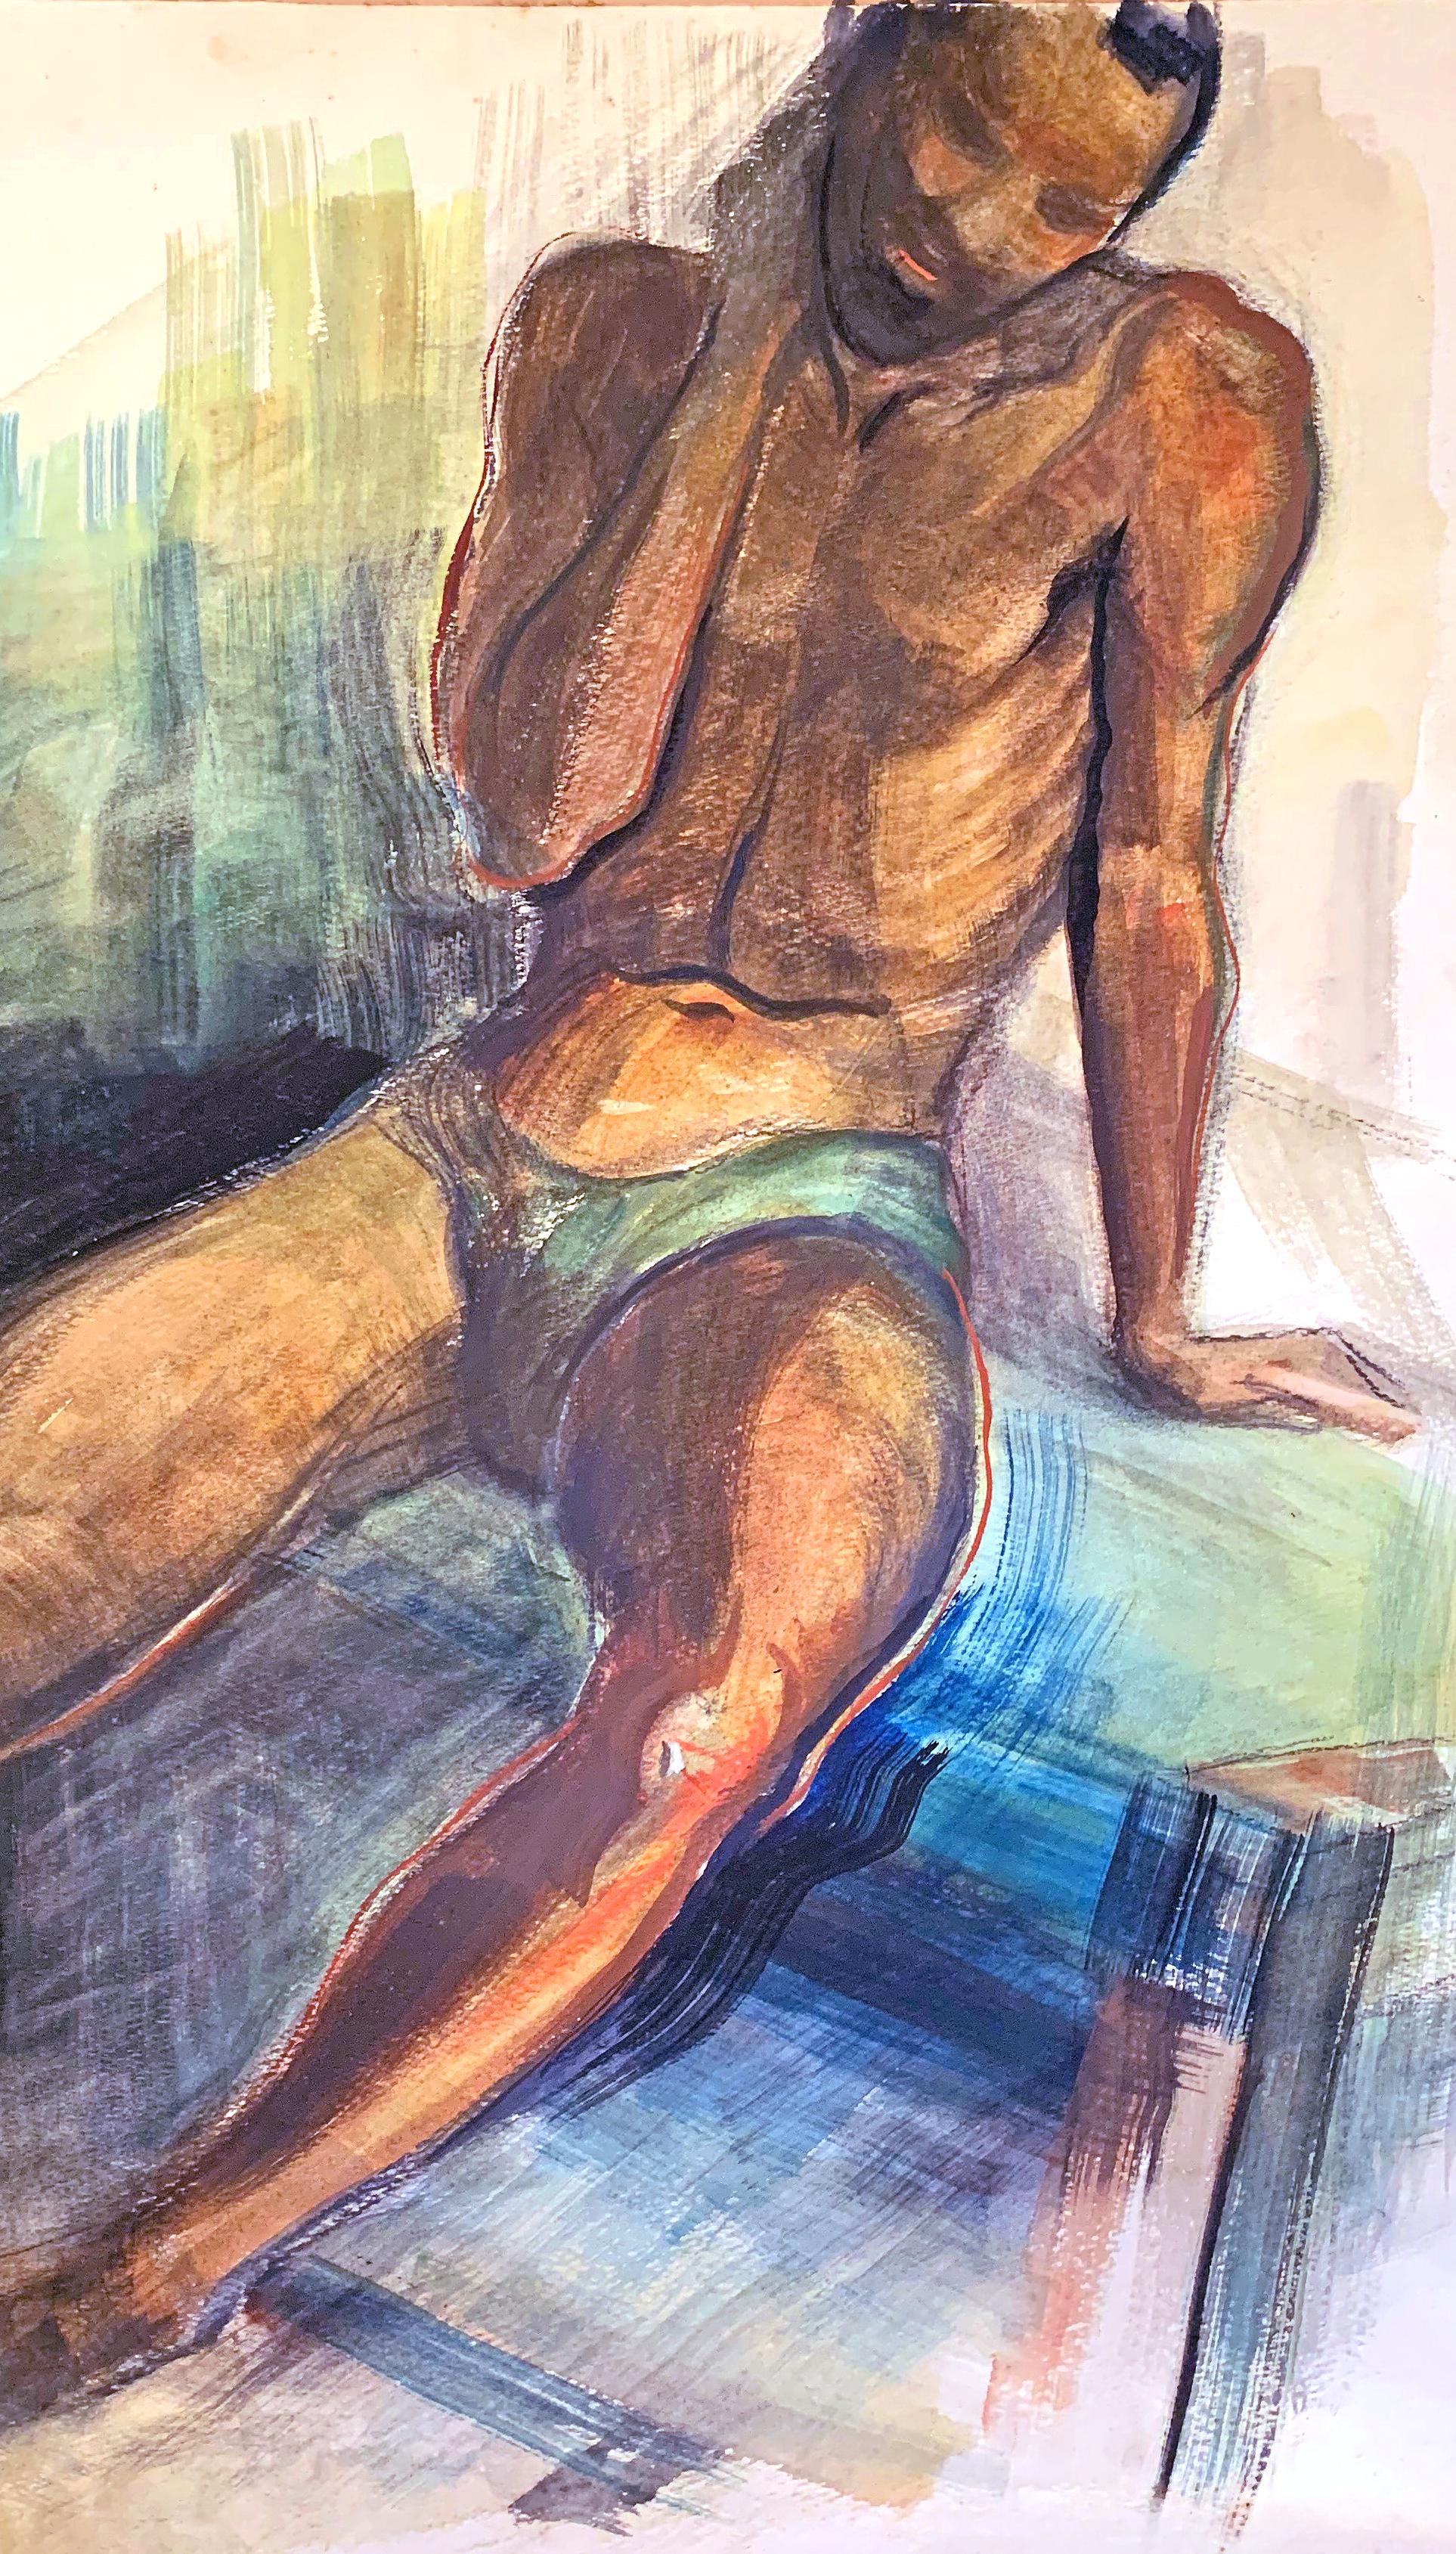 This painting of a Black male nude, executed in rich, brilliant shades of burnt sienna, reddish brown, blue and green, was painted by a Brown County, Indiana artist, though it is not signed. There are hints of WPA/Art Deco stylization in some of the